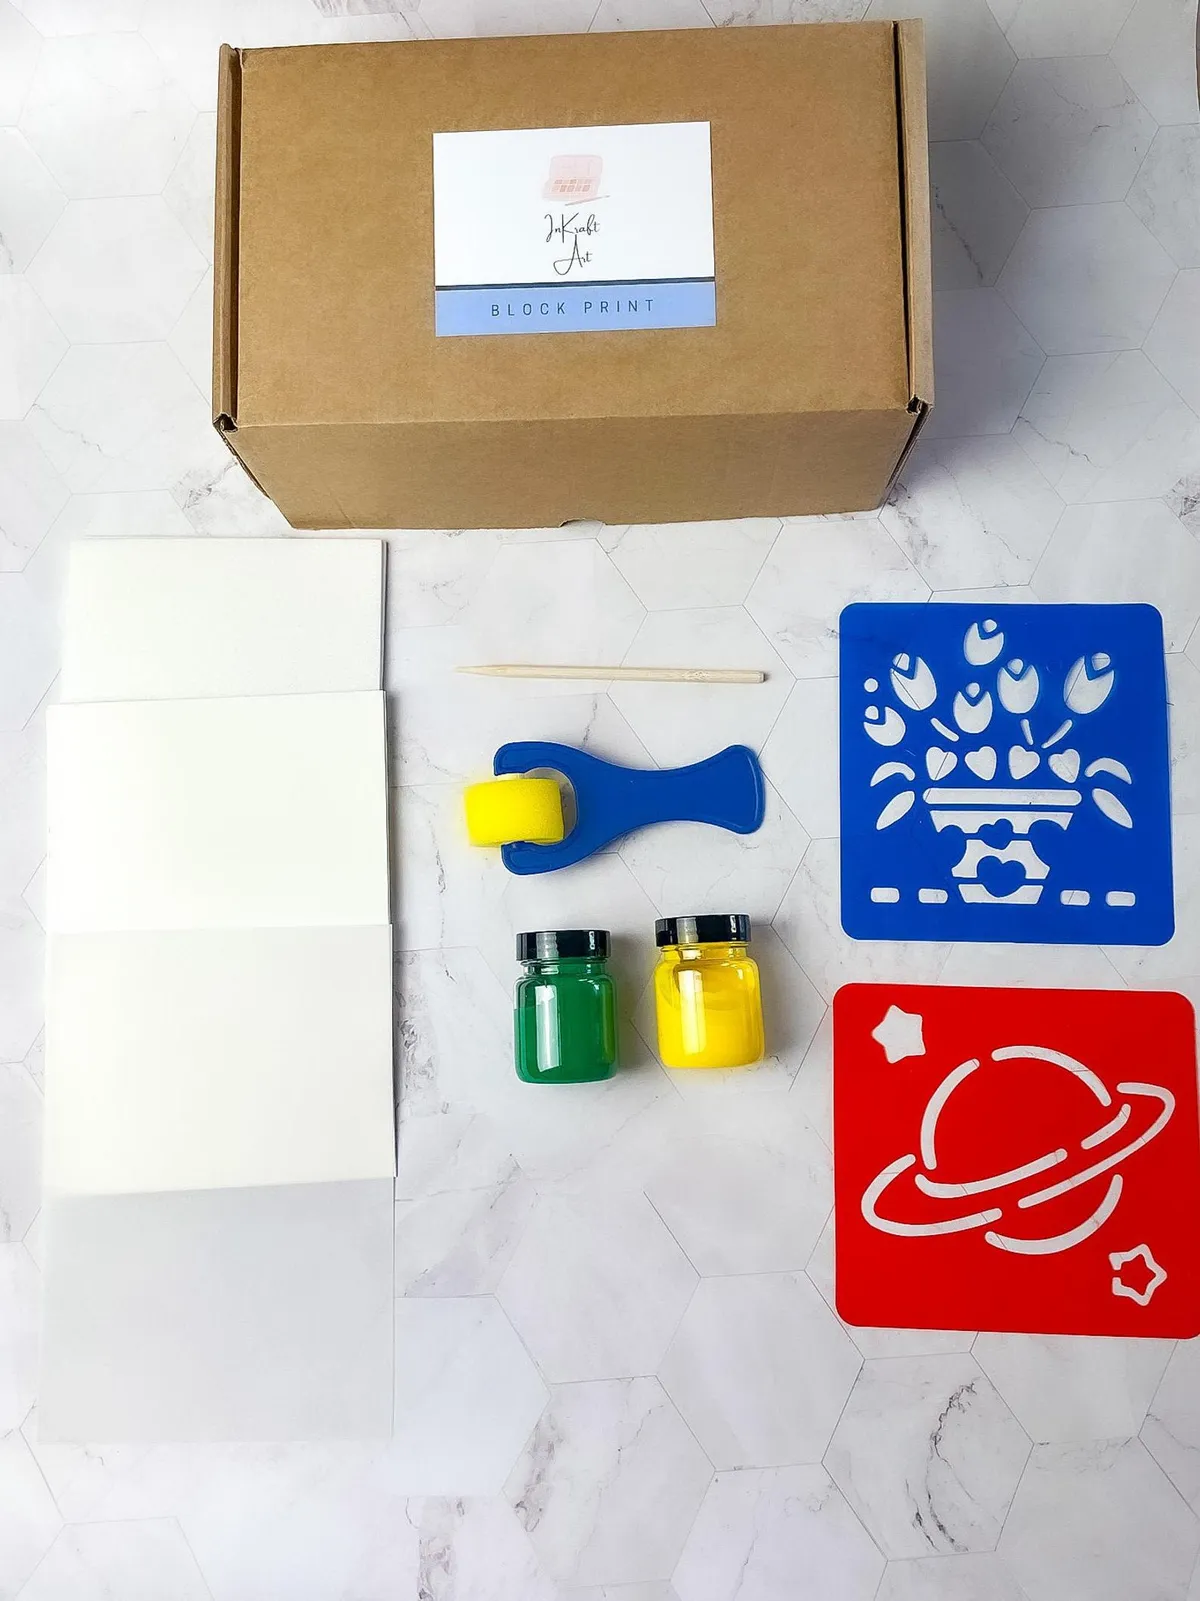 Block Printing Craft Kit for Toddlers and Kids!